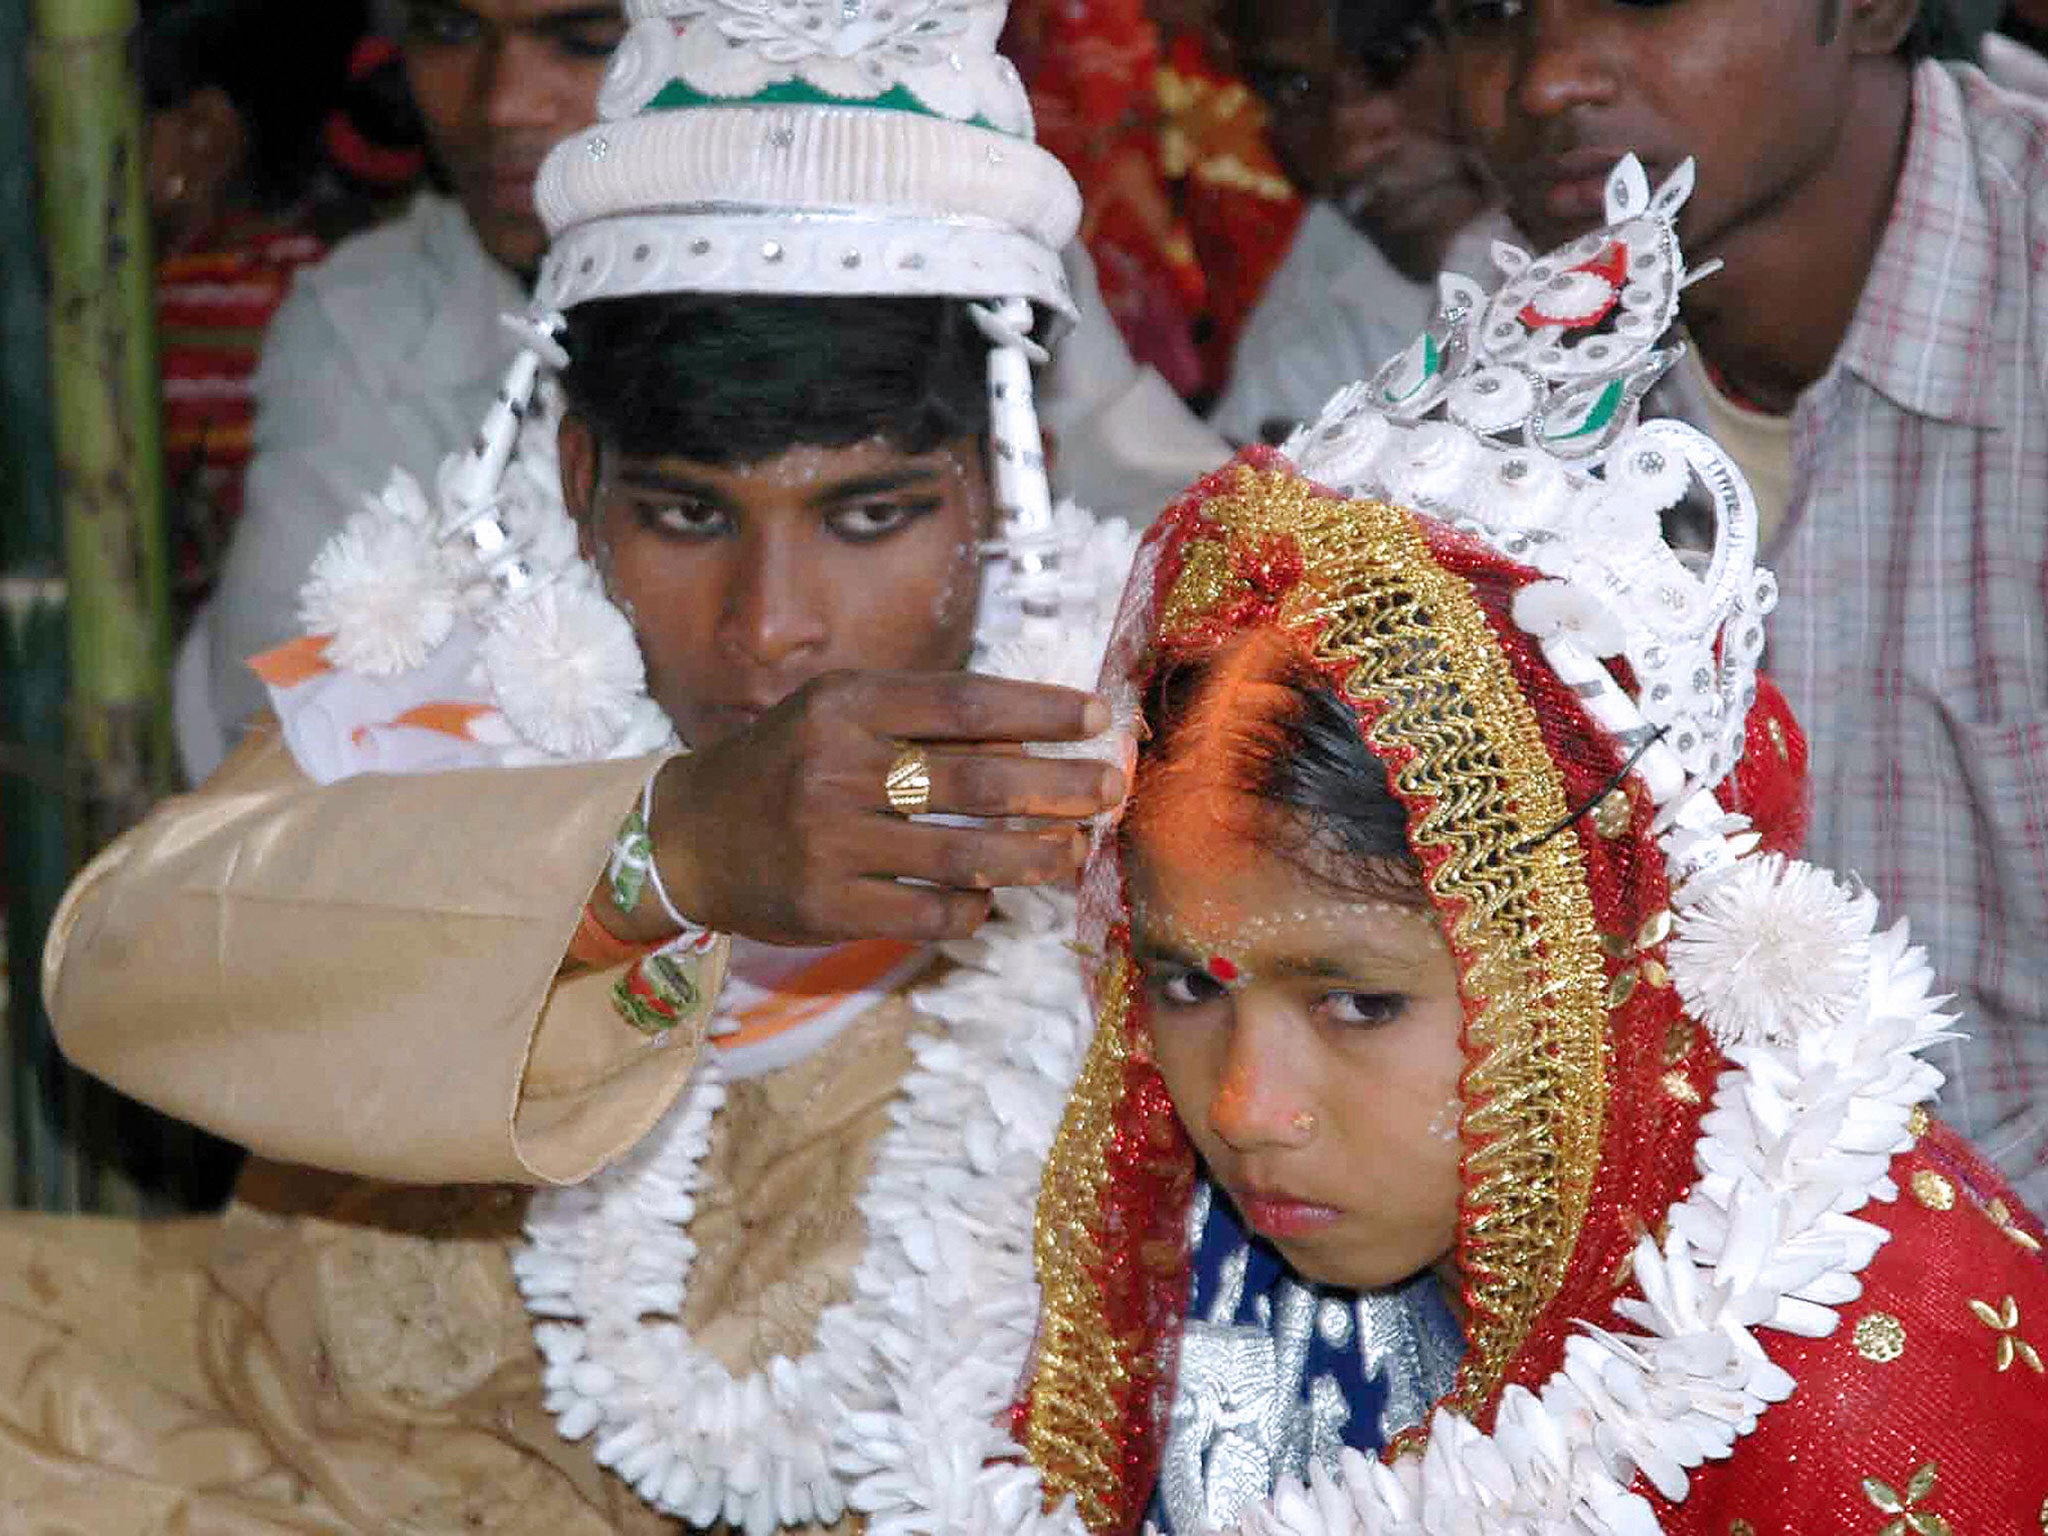 World Minimum Marriage Age Chart Shows The Lowest Age You Can Legally